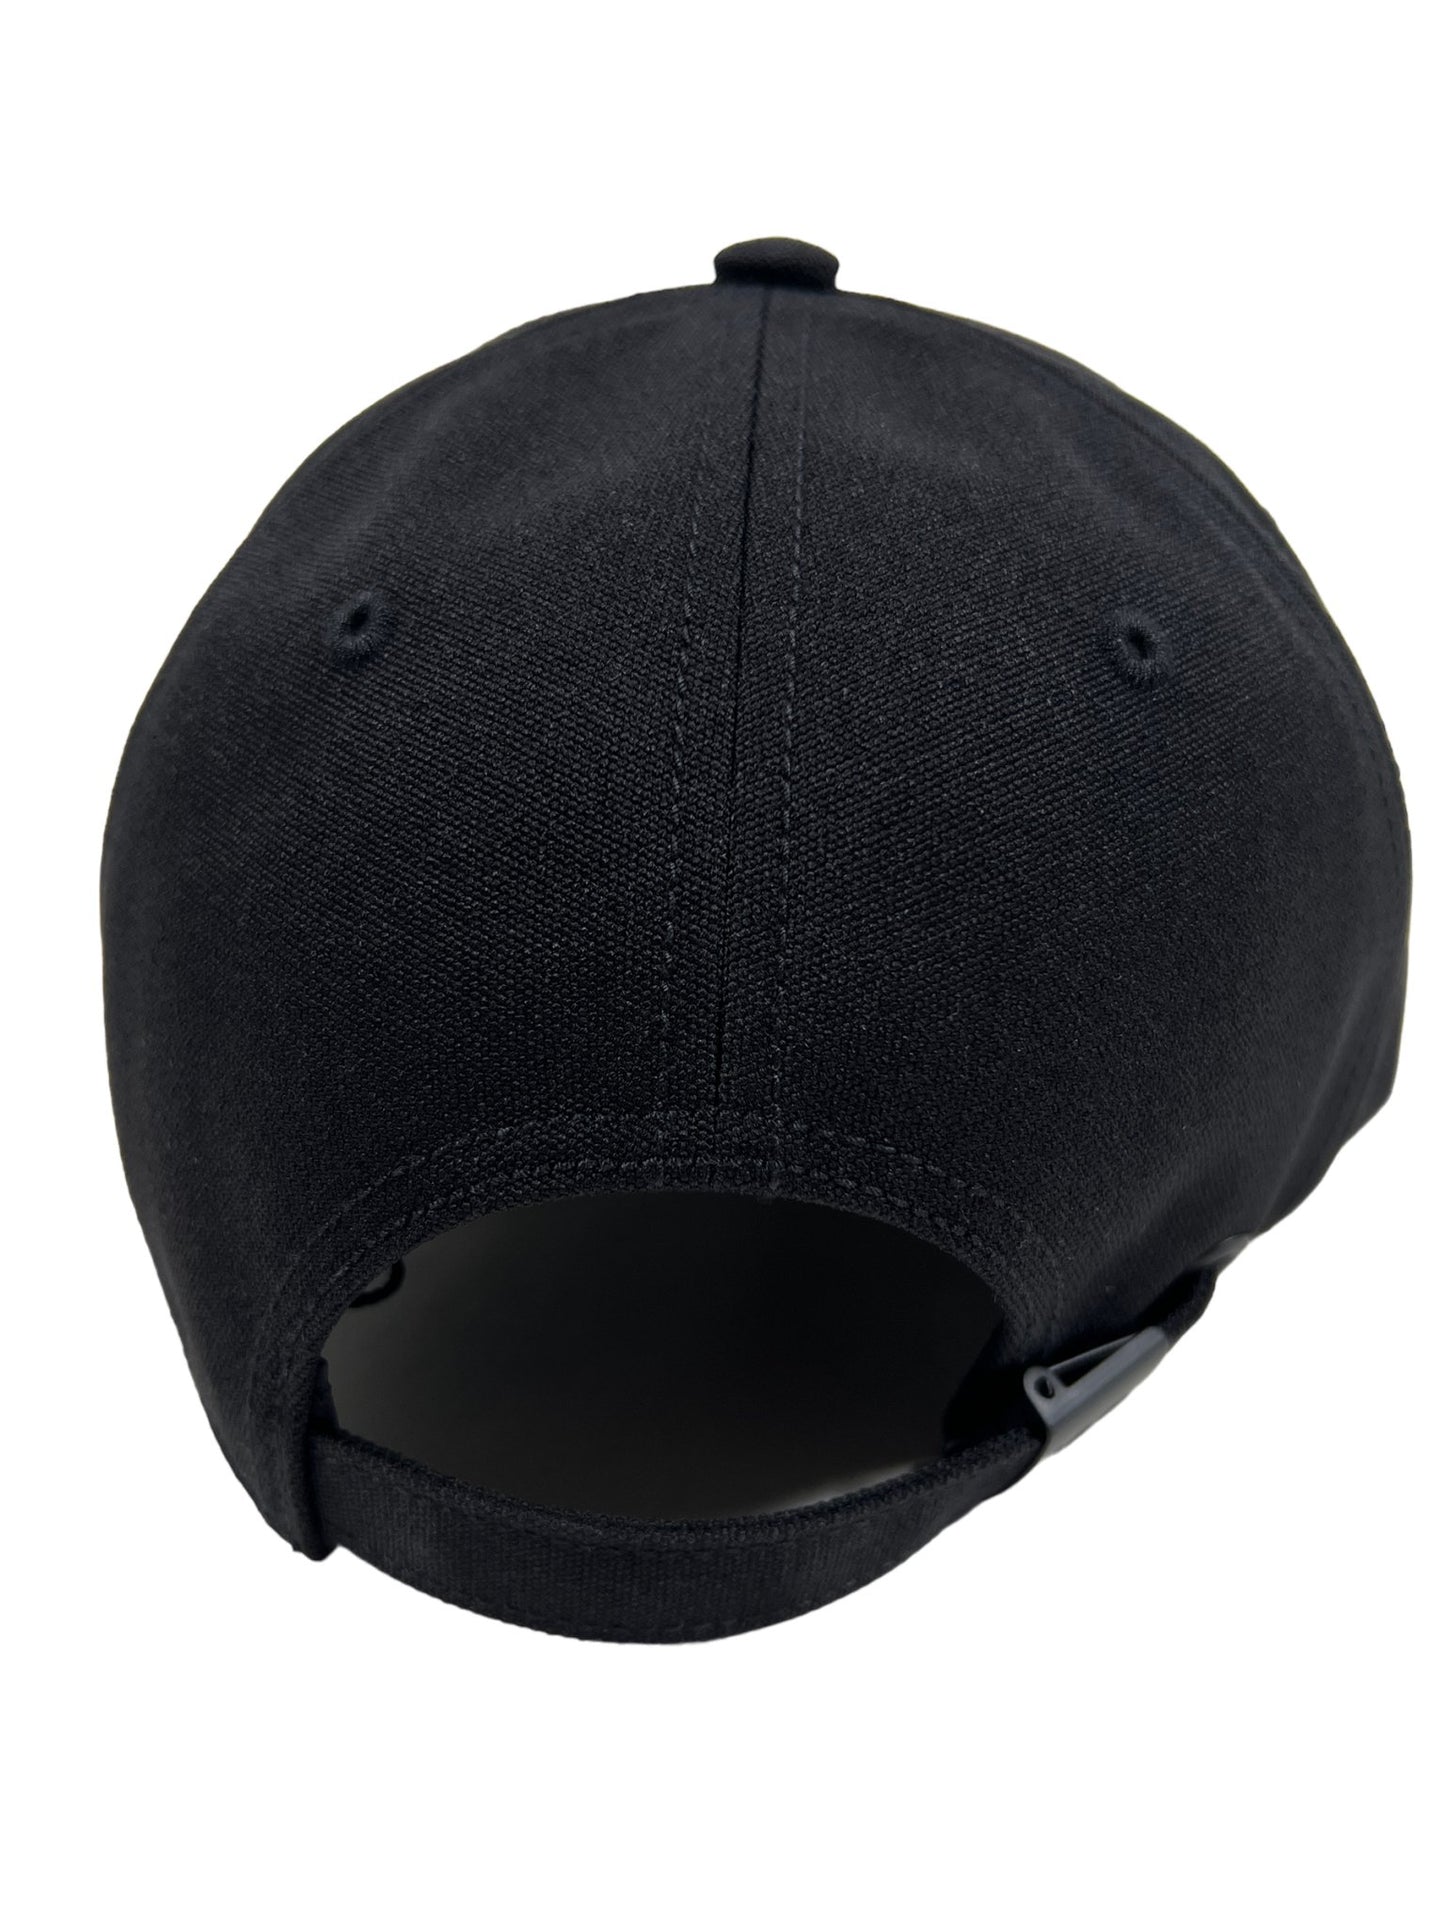 The back view of a sleek and stylish ADIDAS x Y-3 embroidered black baseball cap.